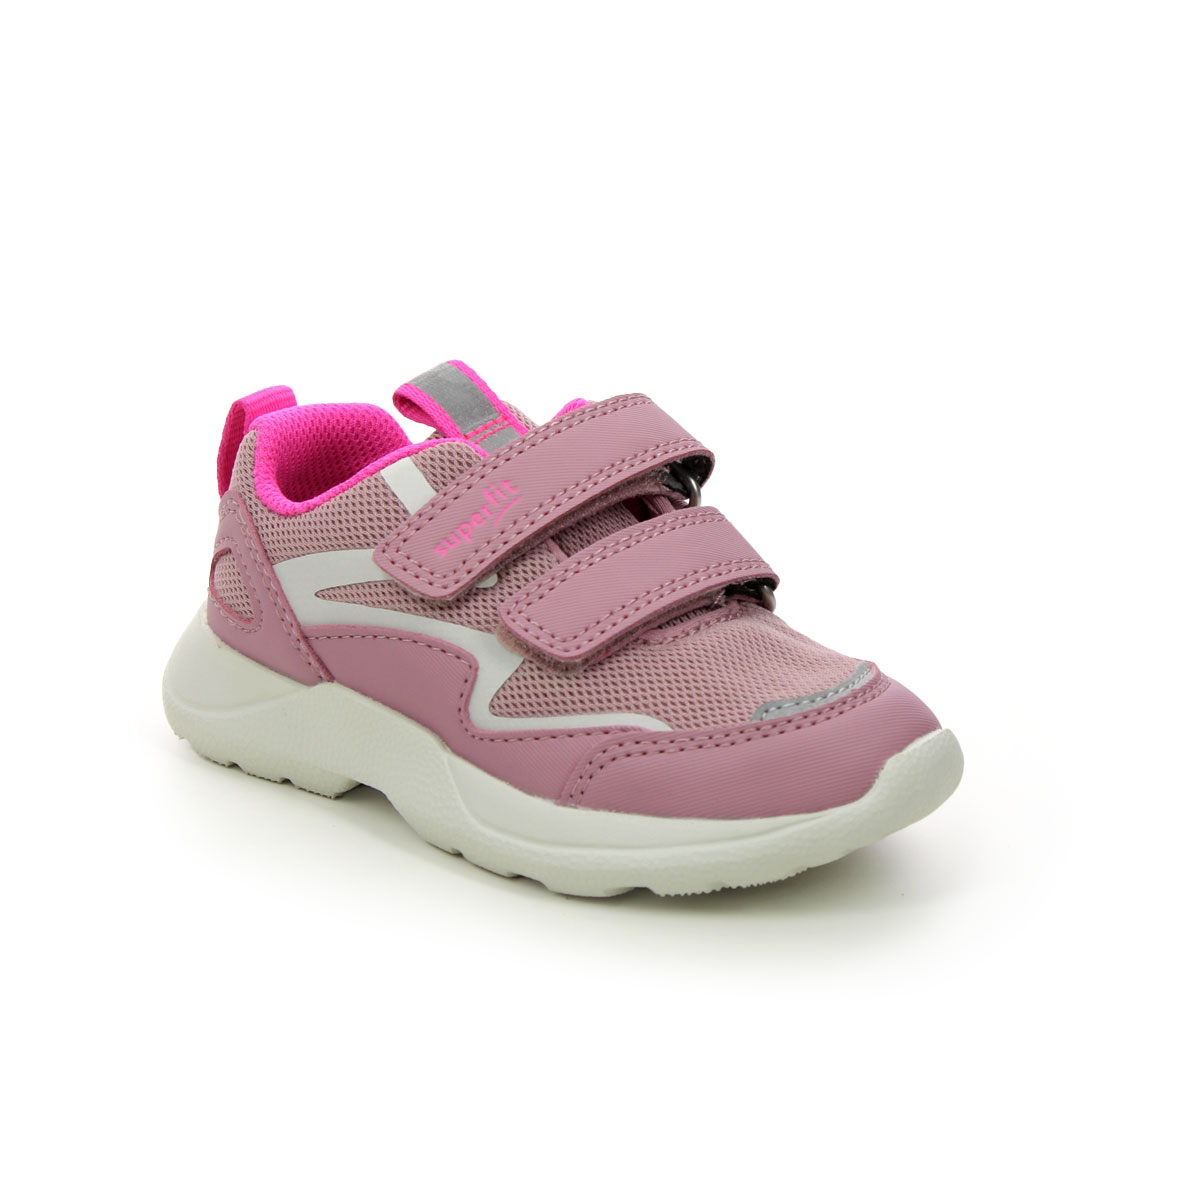 Superfit Rush Mini Pink Kids Girls Trainers 1006206-5510 In Size 23 In Plain Pink For kids